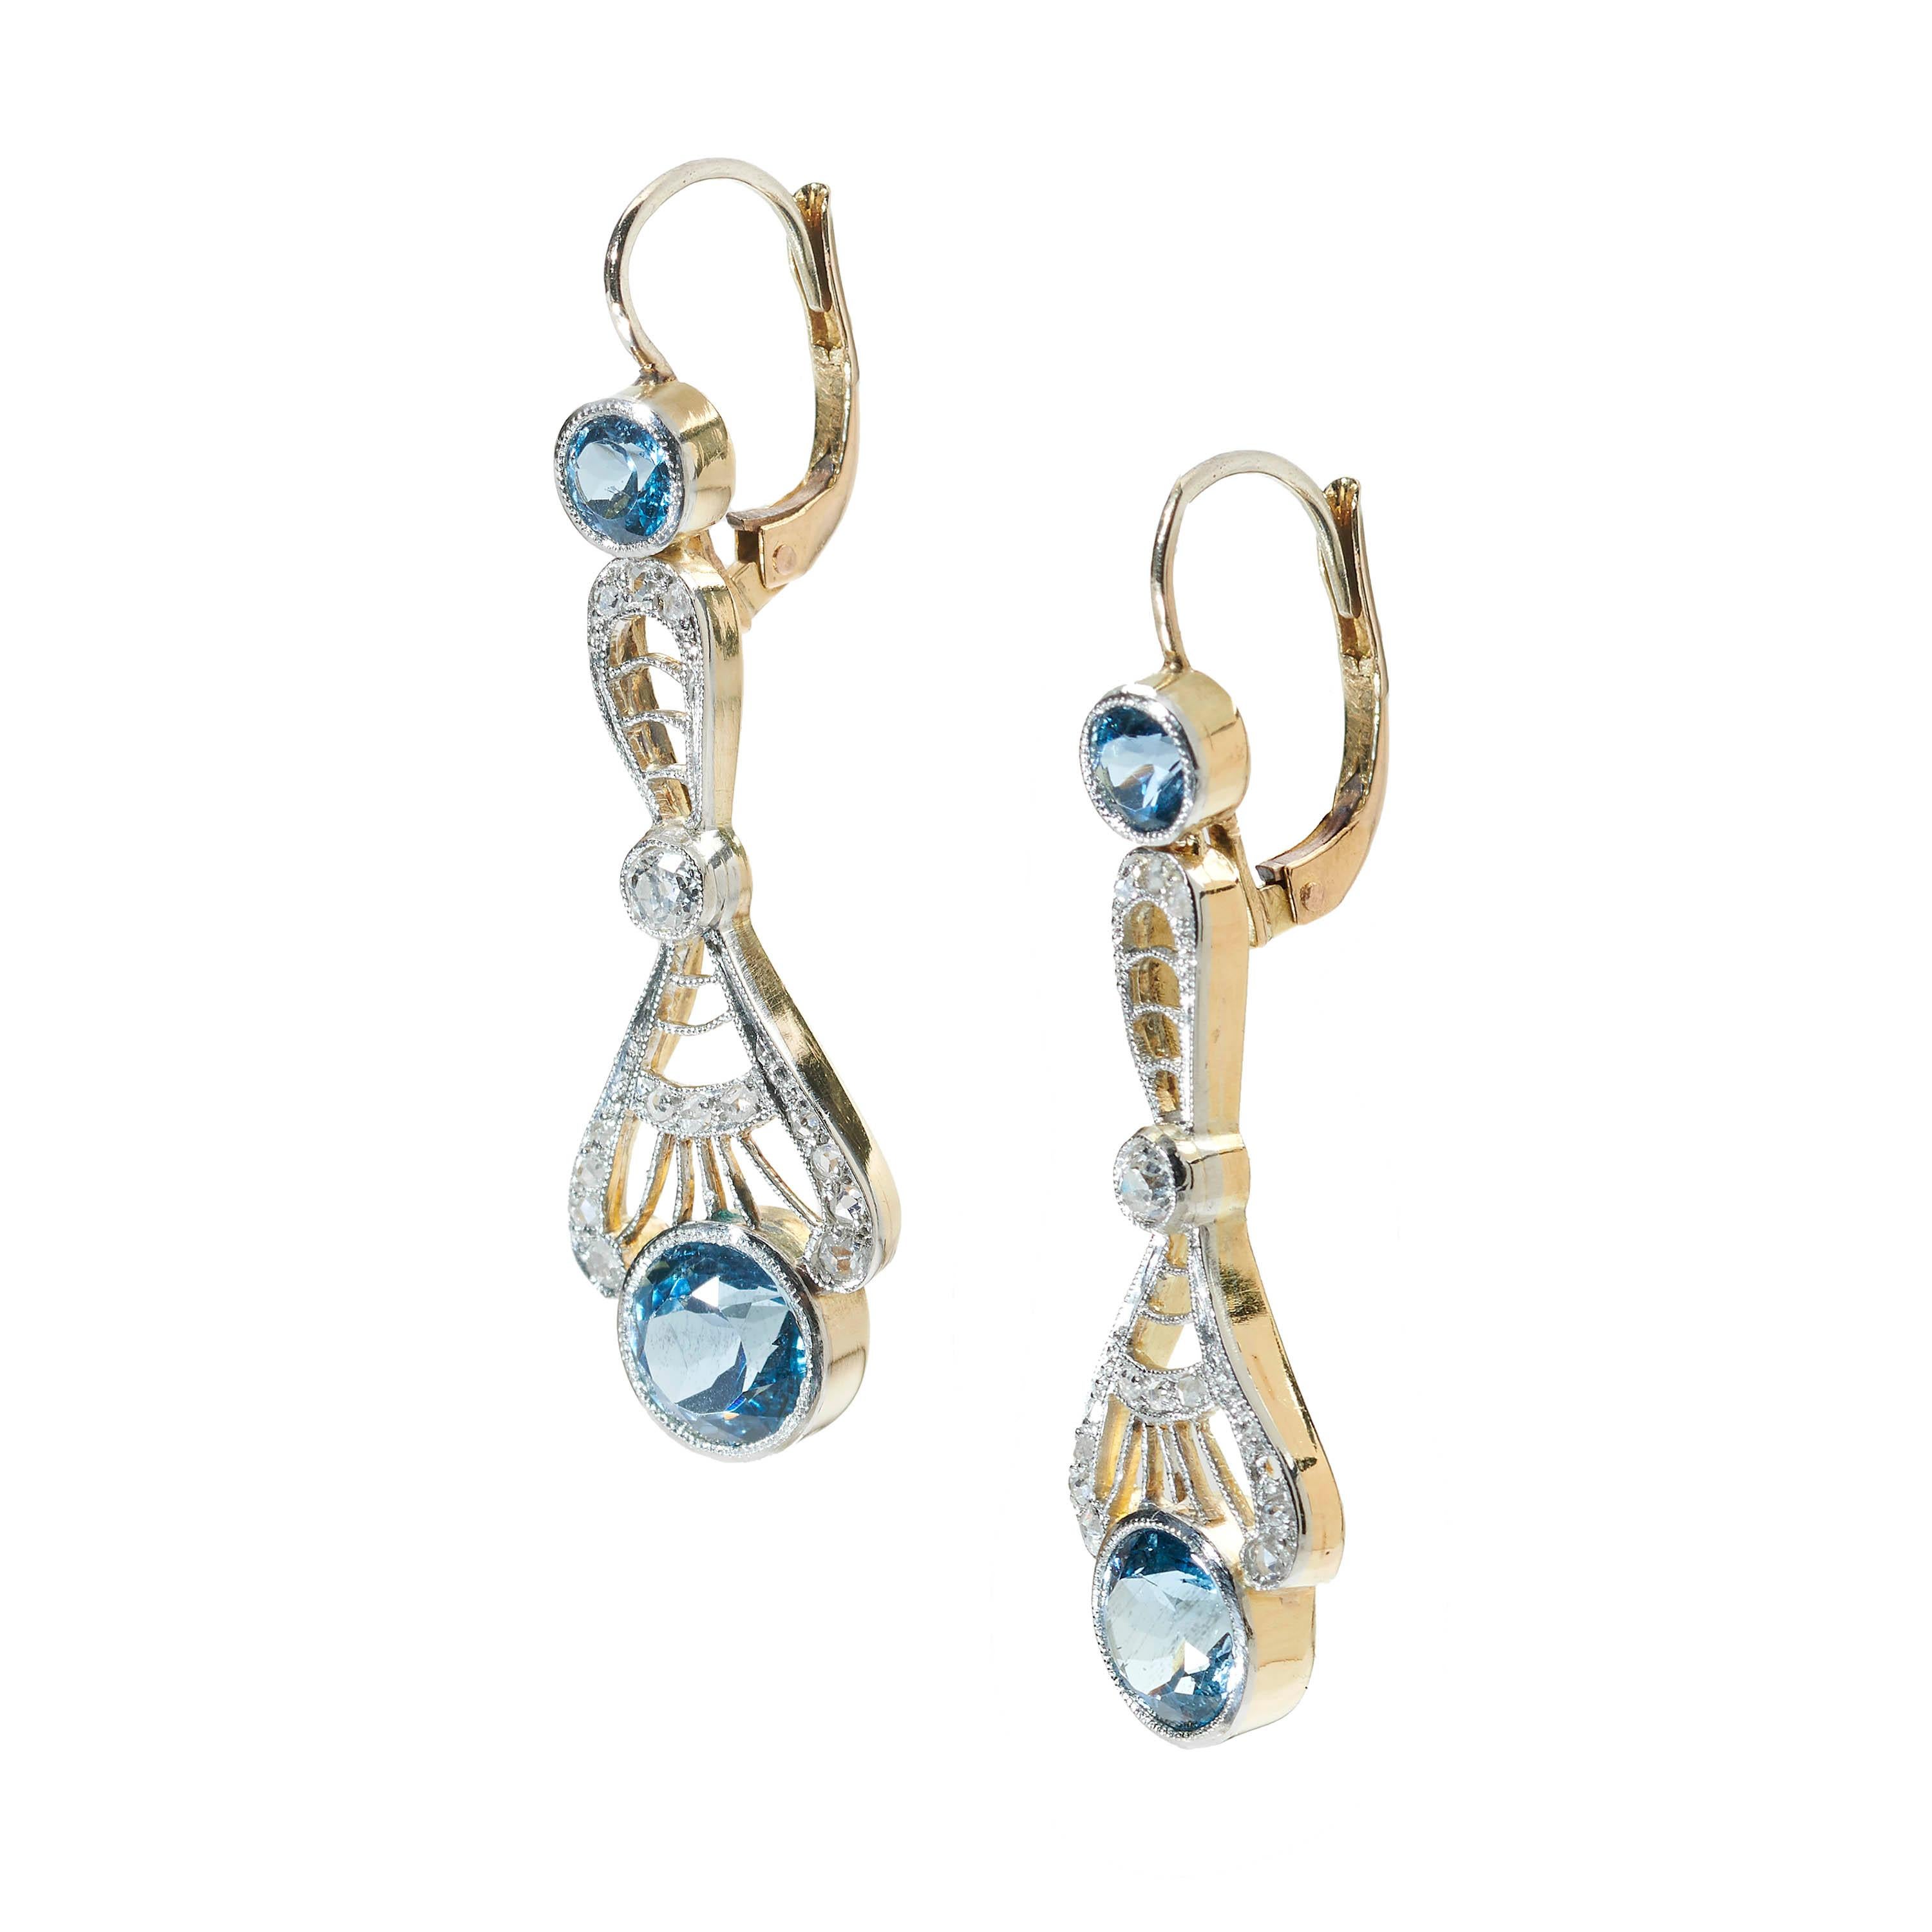 A pair of Edwardian style aquamarine and diamond drop earrings, set with round faceted aquamarines and rose-cut diamonds, weighing an estimated 0.25ct, with rub over and grain settings and millegrain edges, mounted in gold with silver settings.